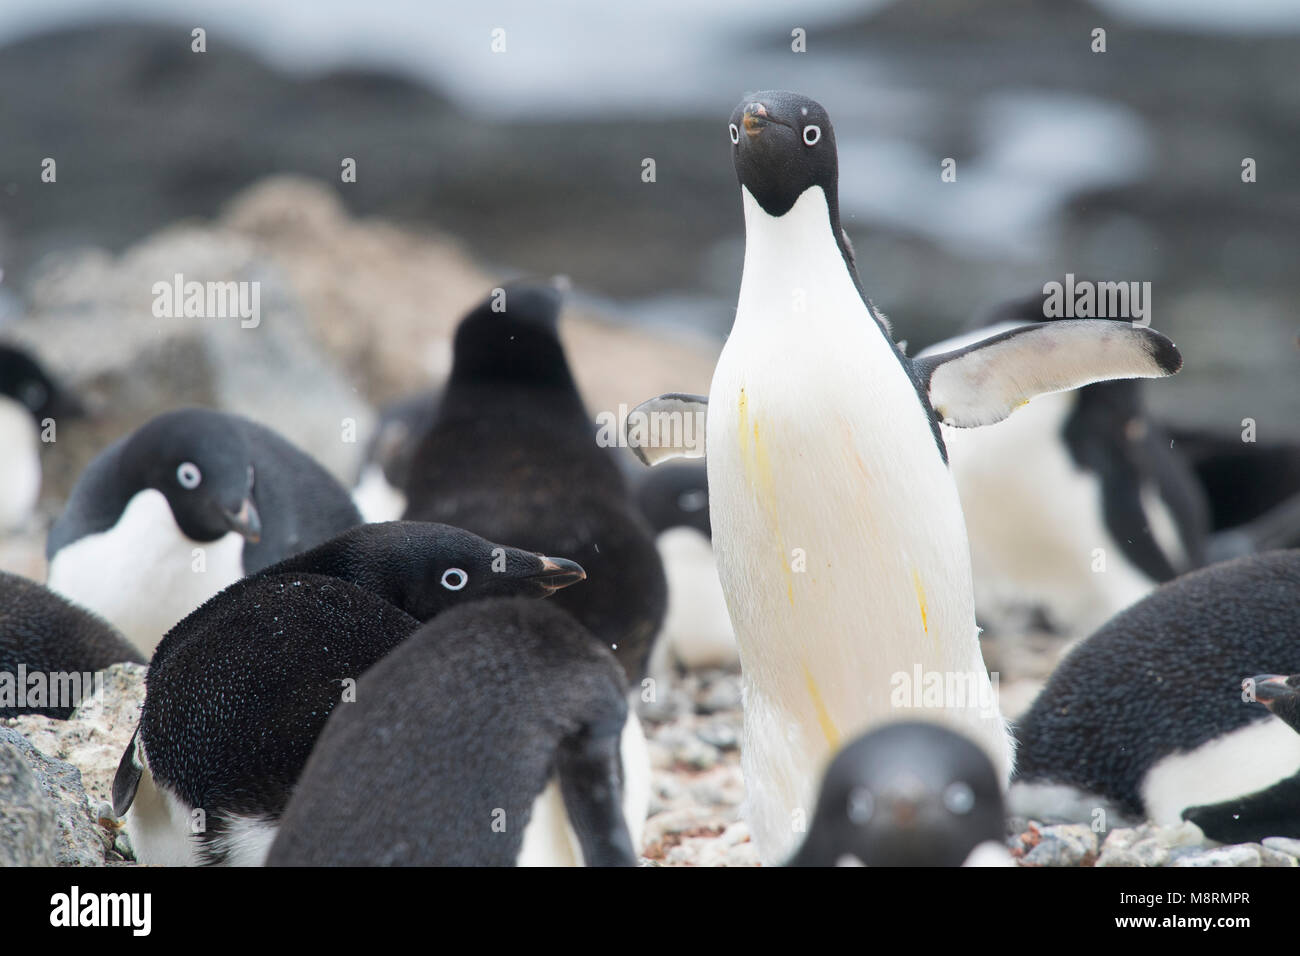 An Adelie penguin walks among other nesting penguins at the colony on Brown Bluff, Antarctica. Stock Photo